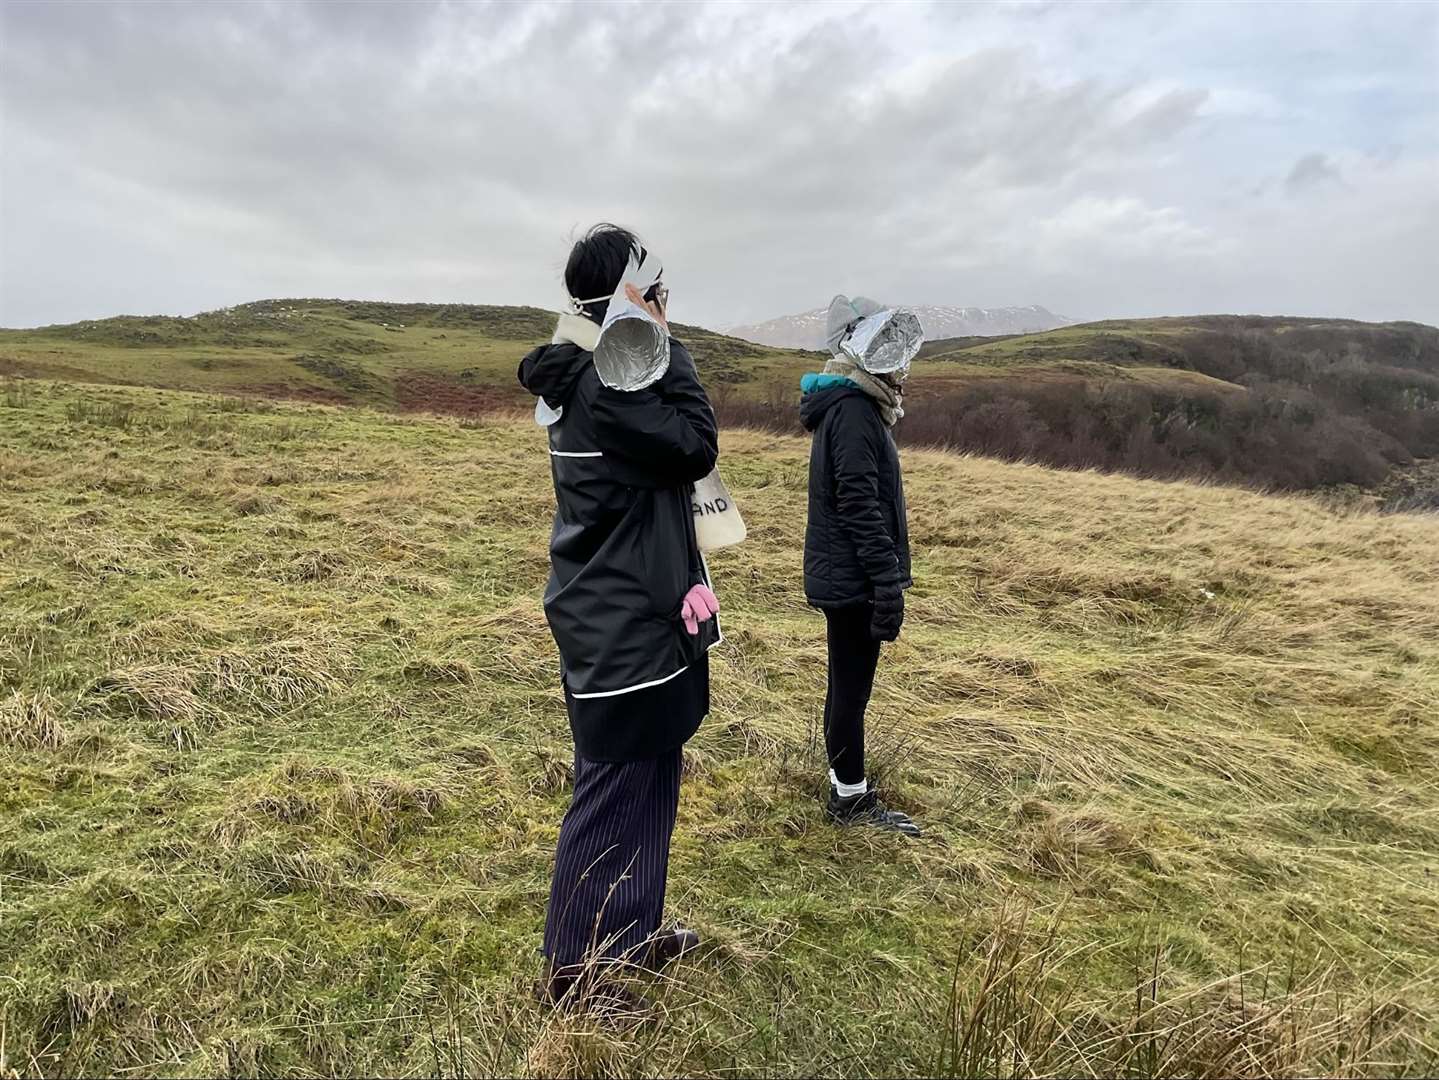 Taking in nature in a new way is a key part of a new workshop being put on by Glasgow art group Those Who Collect Dirt, together with Deveron Projects.